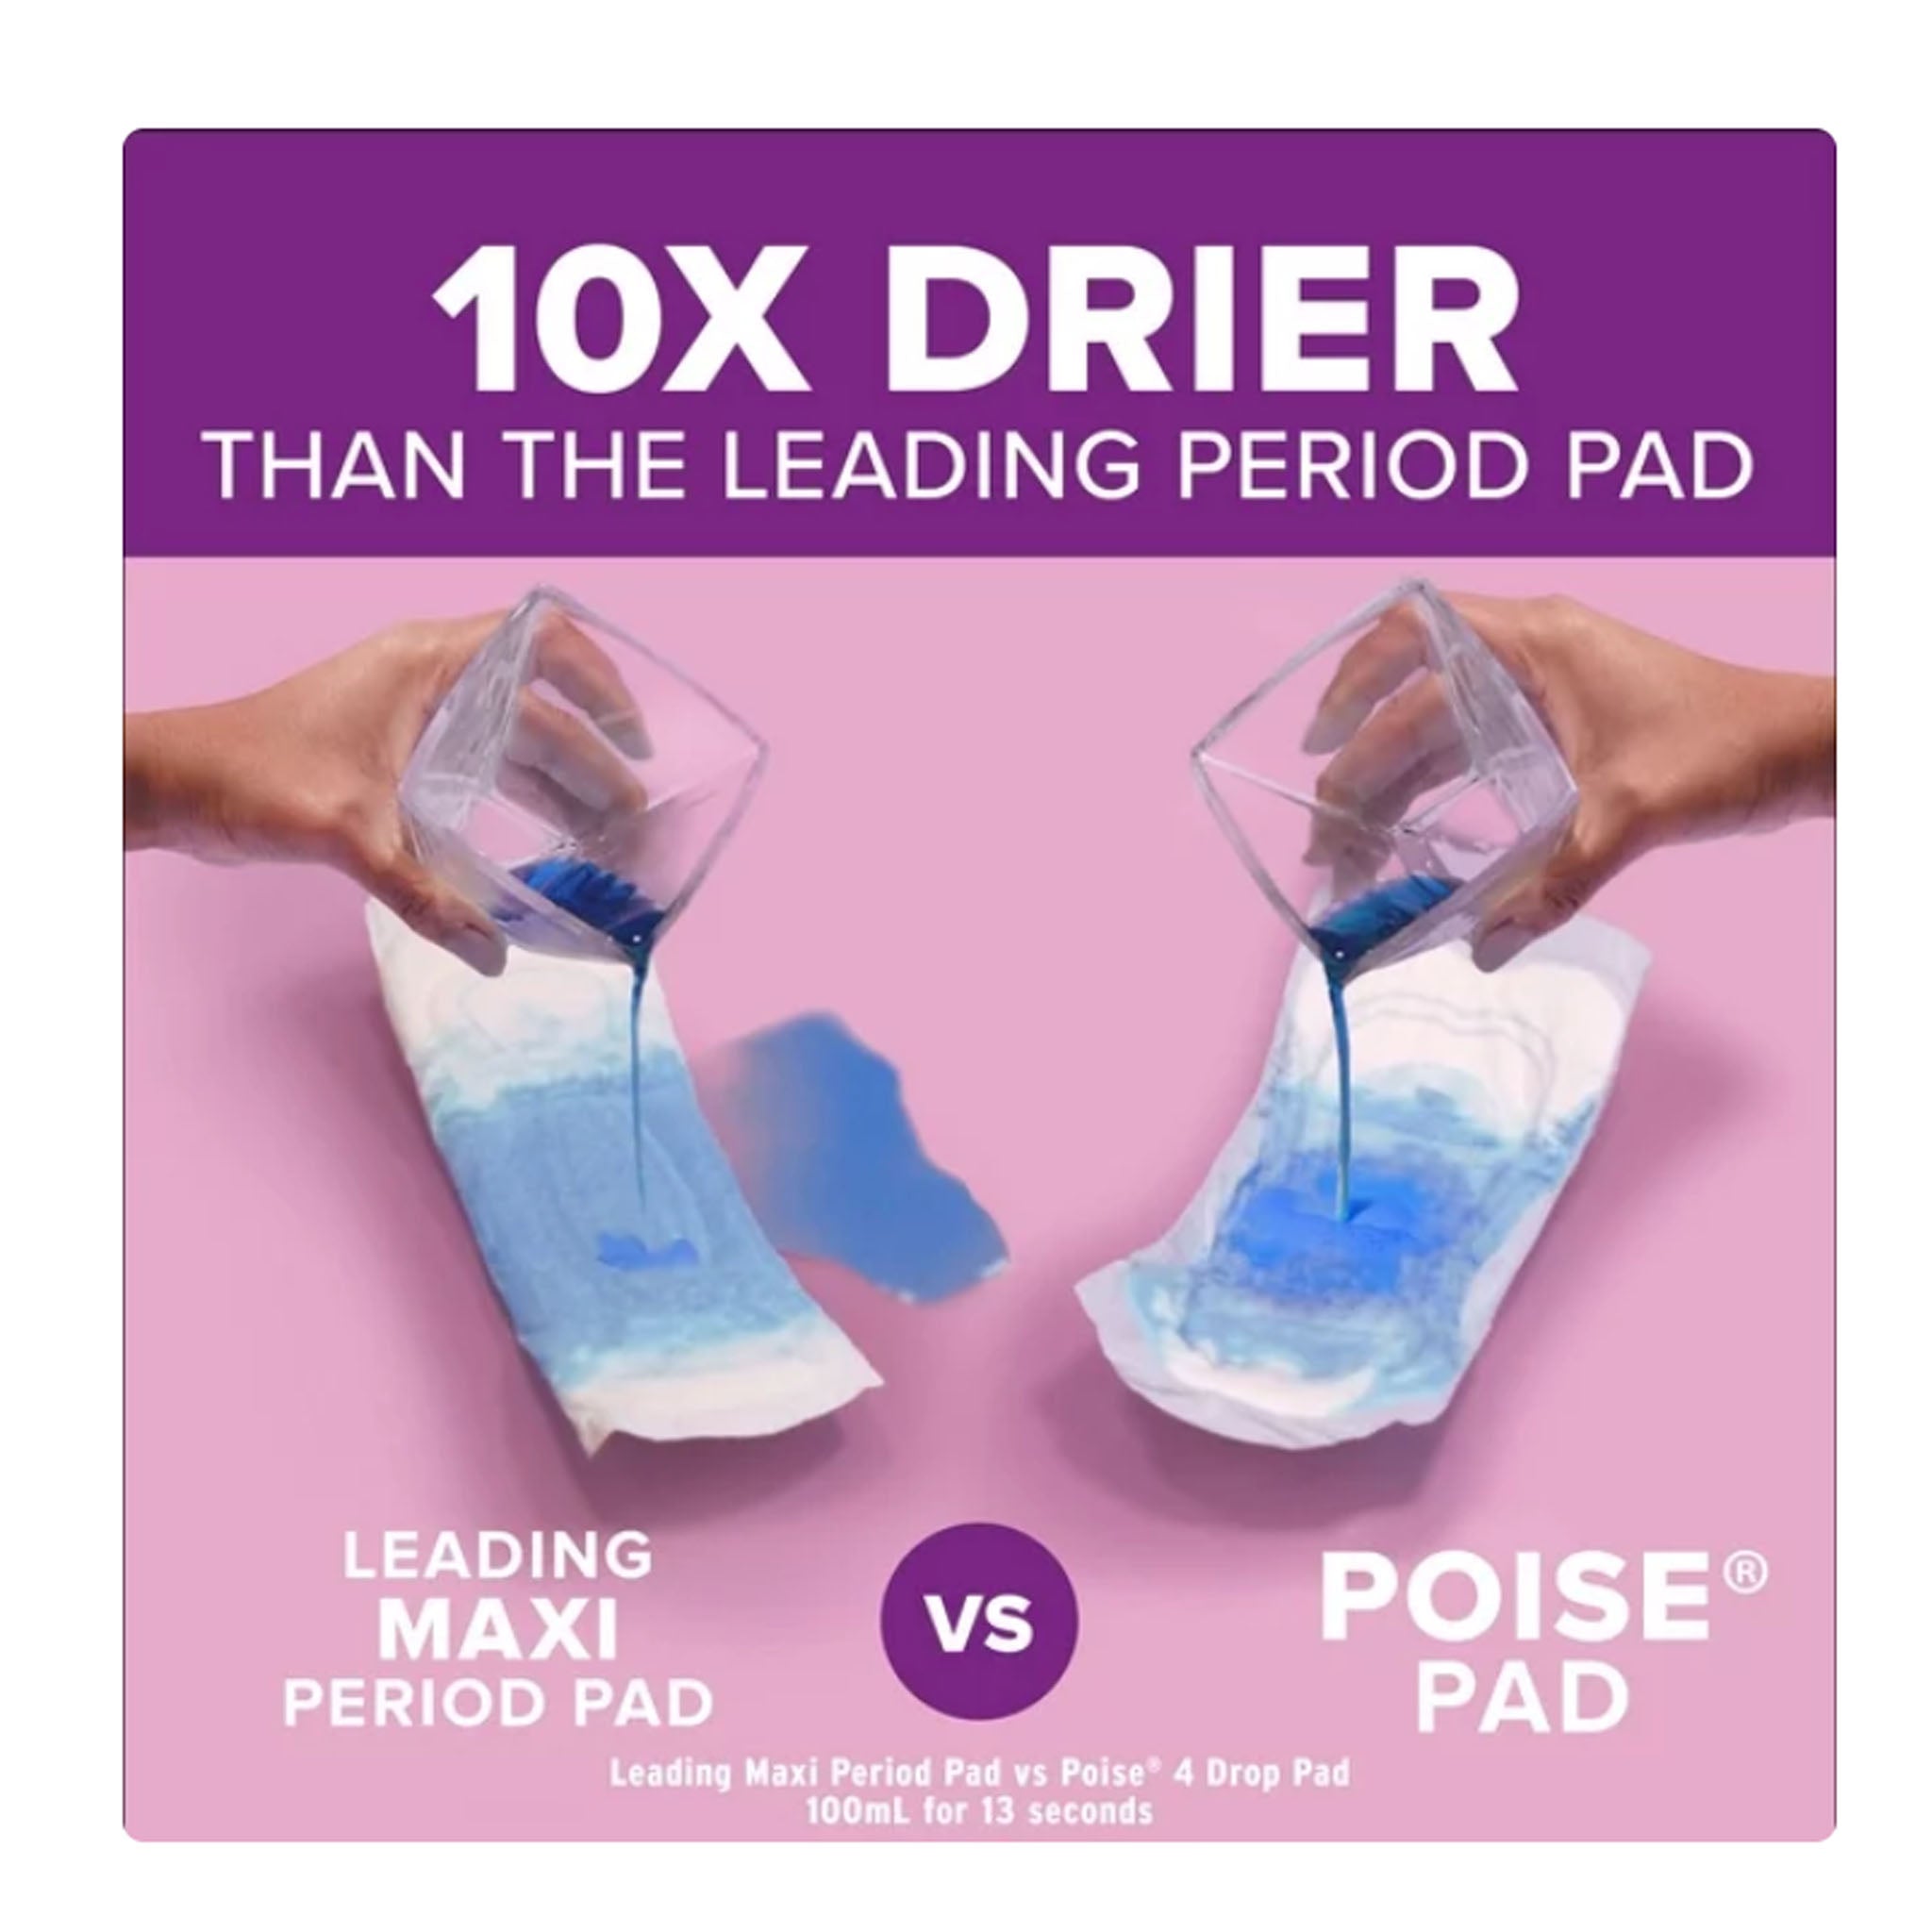 Poise Bladder Control Pads (Moderate Absorbency)